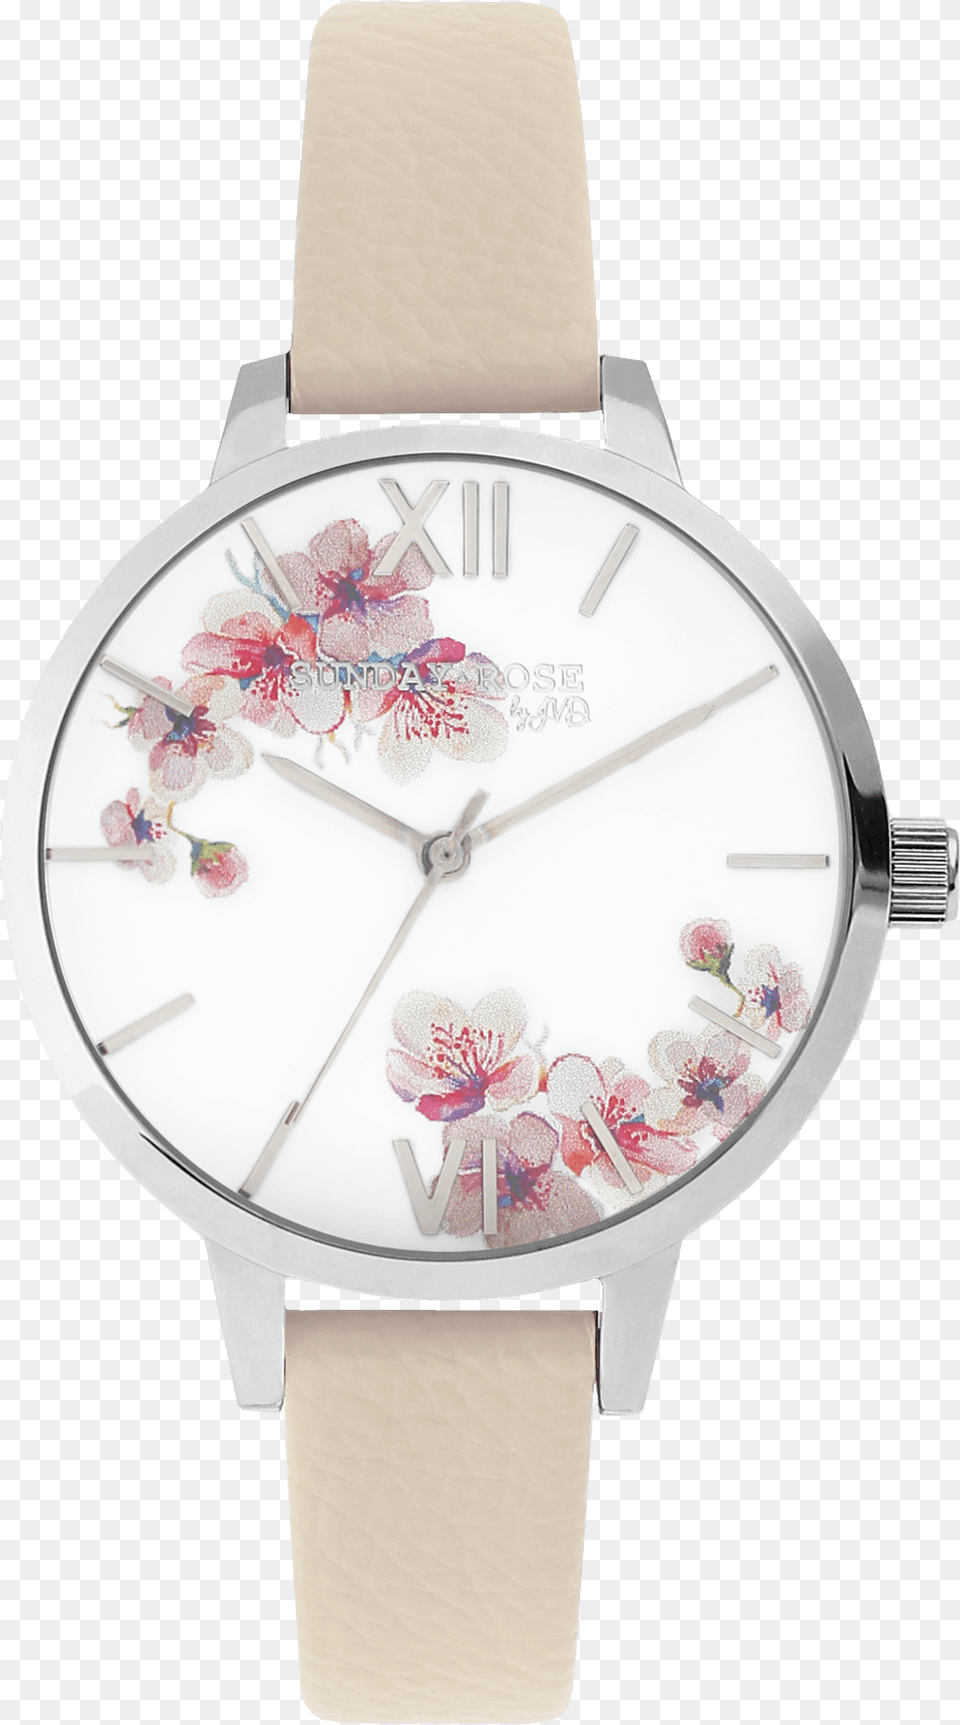 Sunday Rose Spirit Watercolor Hodinky Jvd Sunday Rose, Arm, Body Part, Person, Wristwatch Png